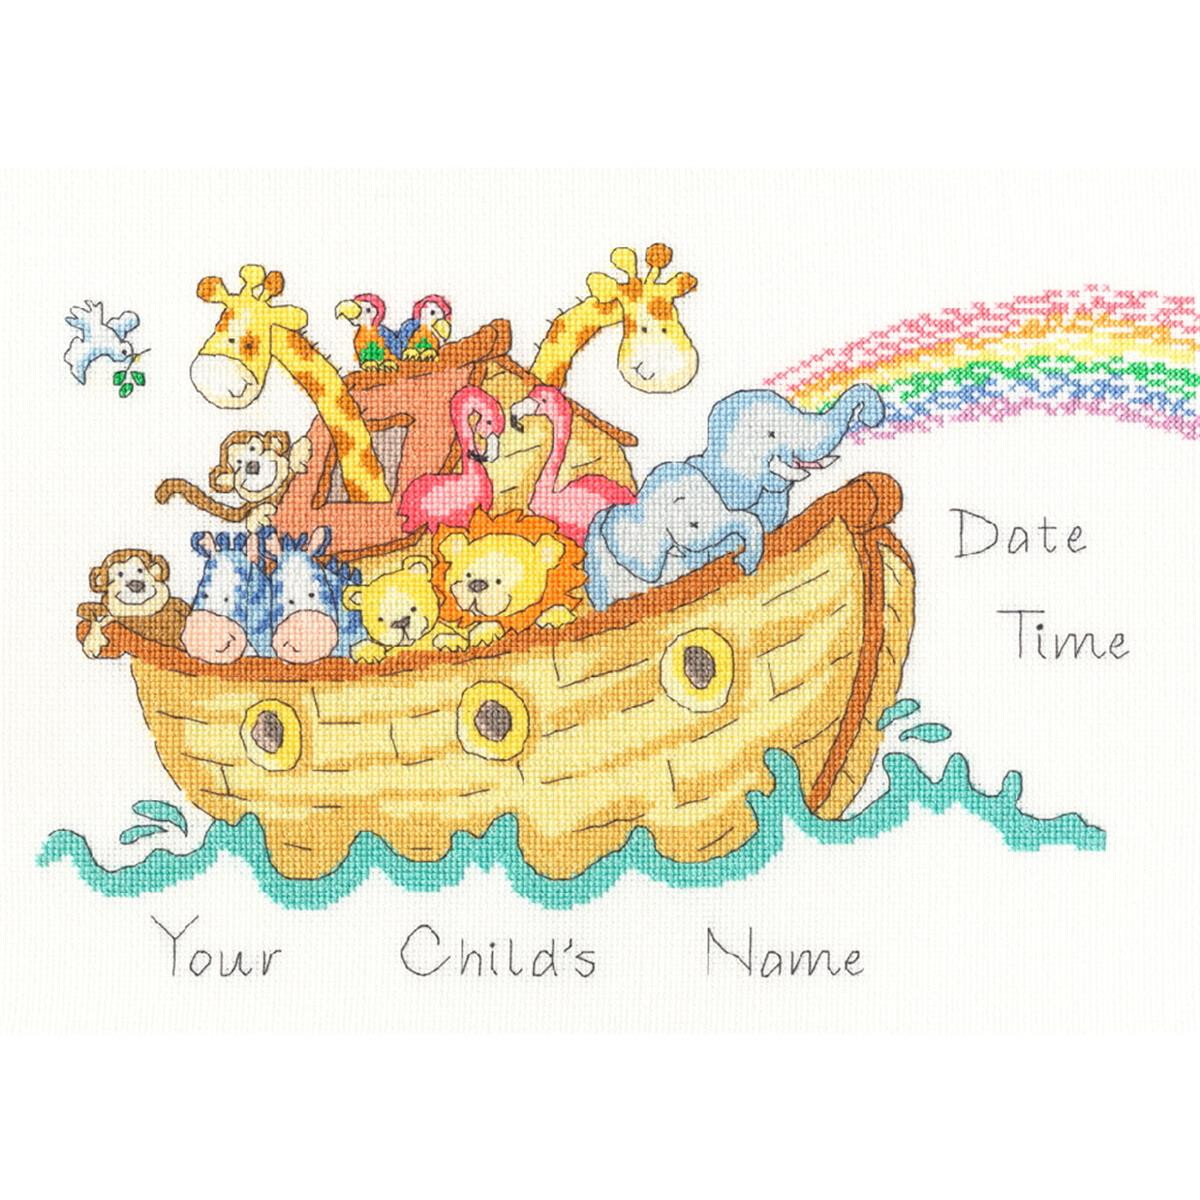 An illustrated picture of Noahs Ark that resembles an...